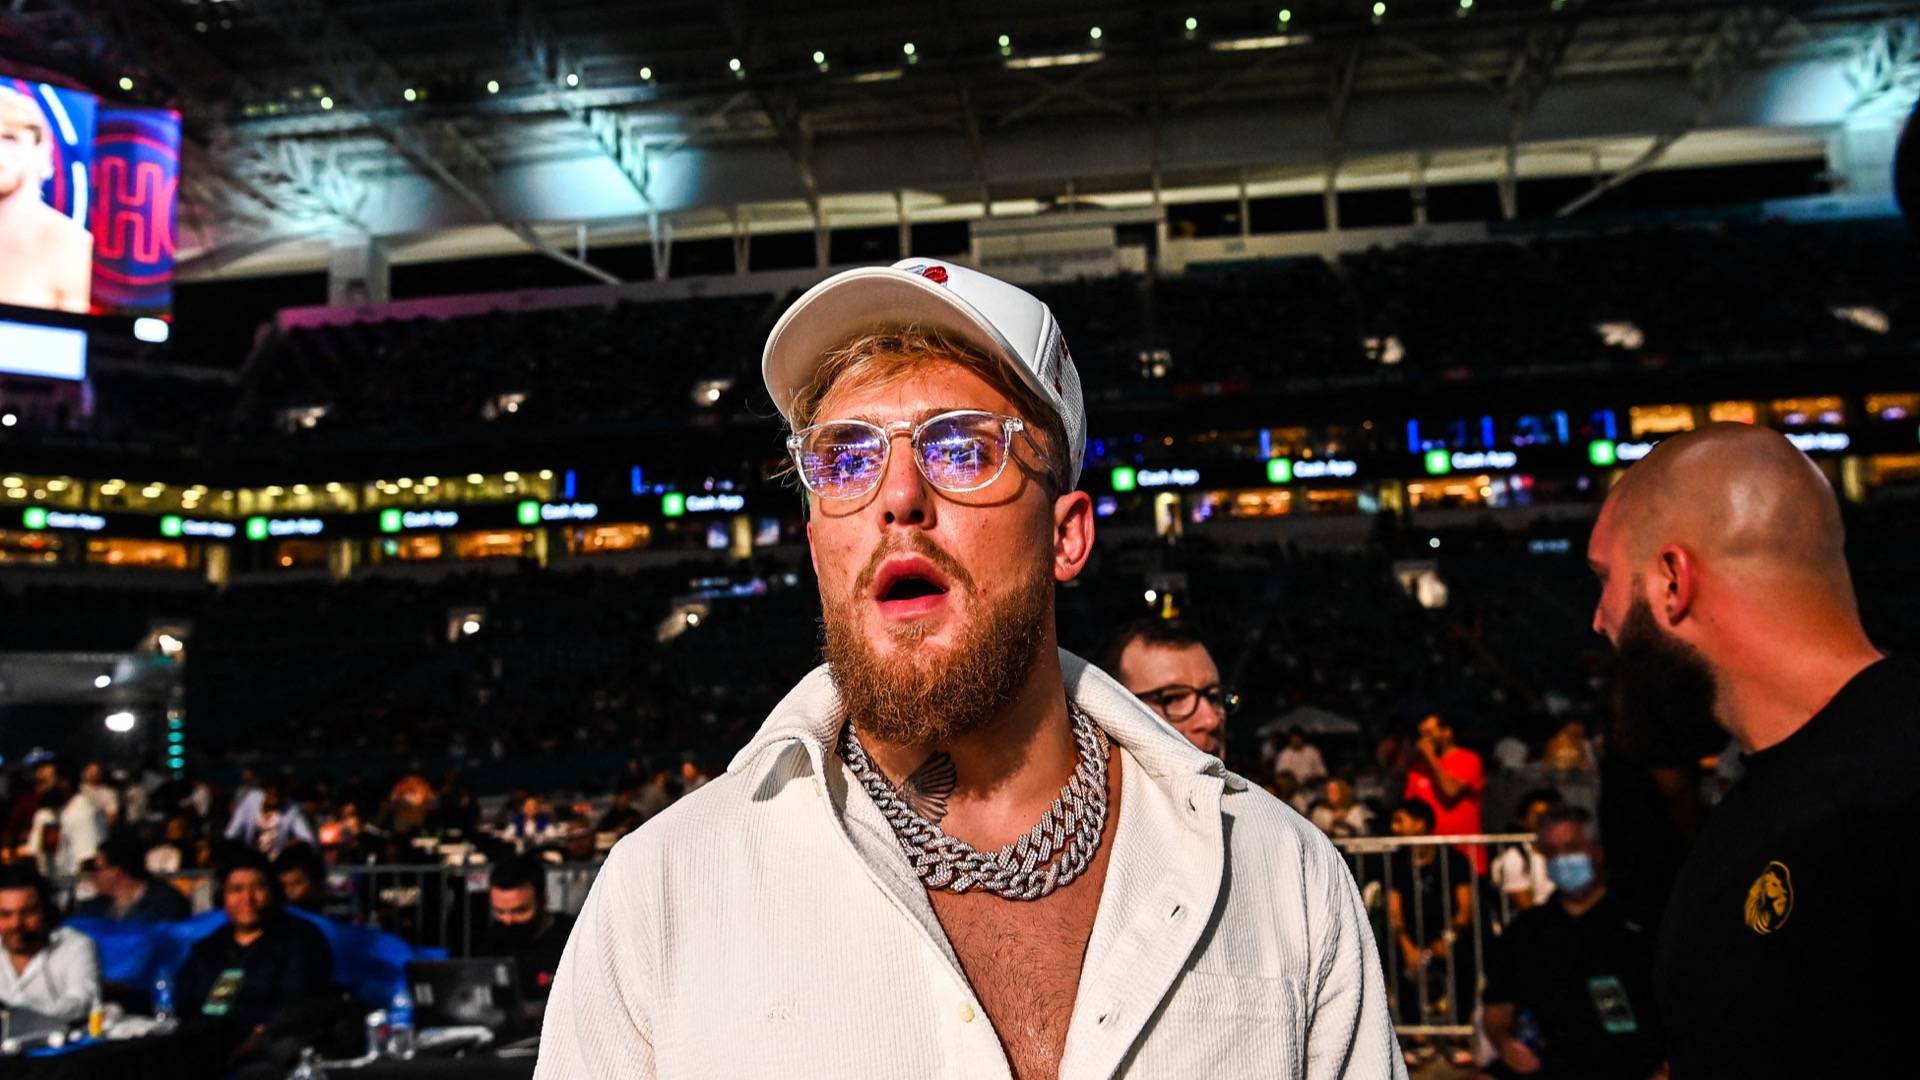 Jake Paul wearing glasses, white button down shirt and white baseball cap, looking off camera open-mouthed